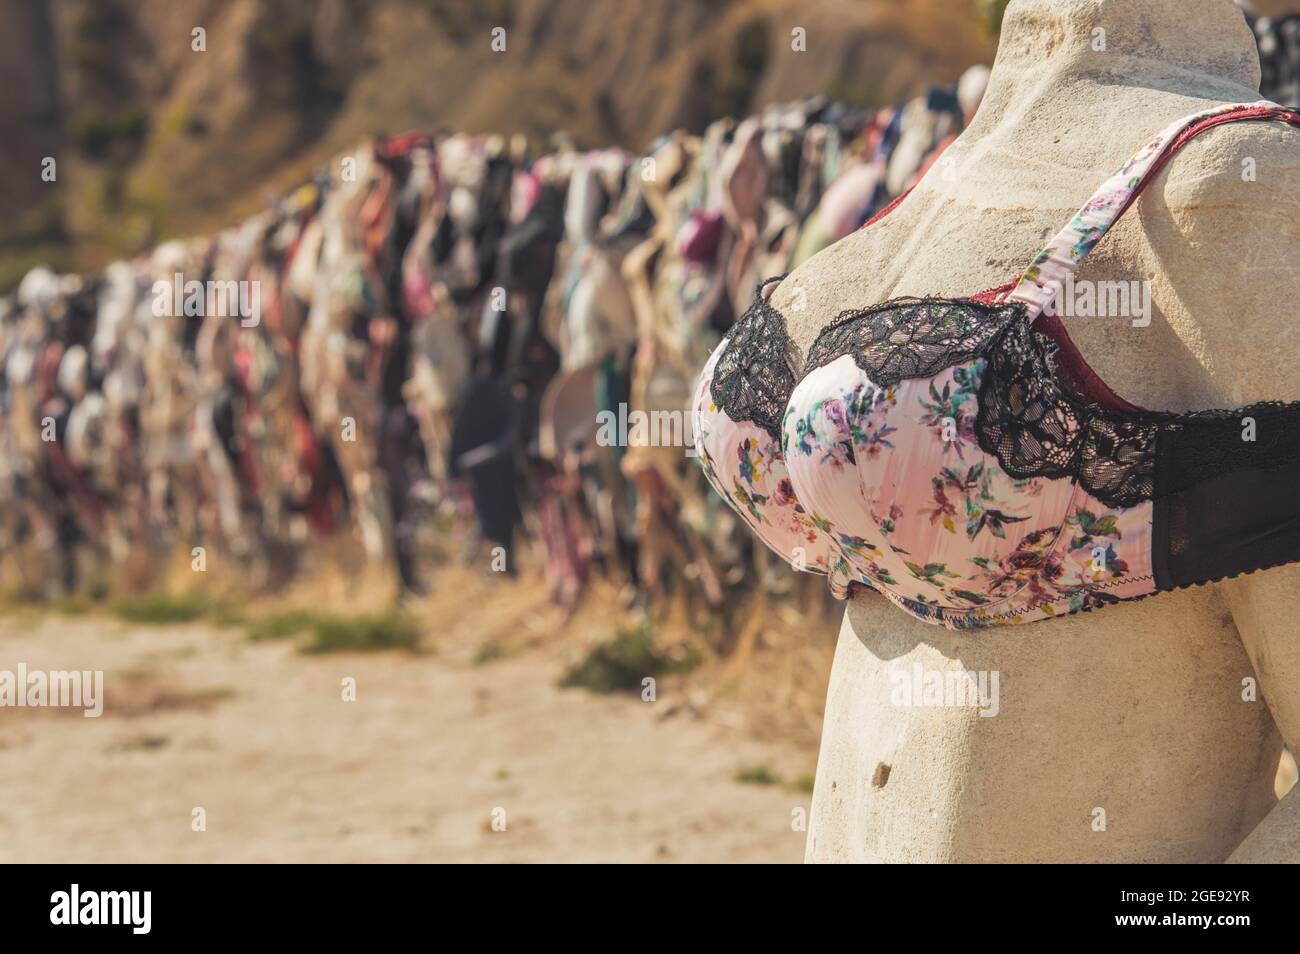 Bras on the fence at New Zealand south island Stock Photo